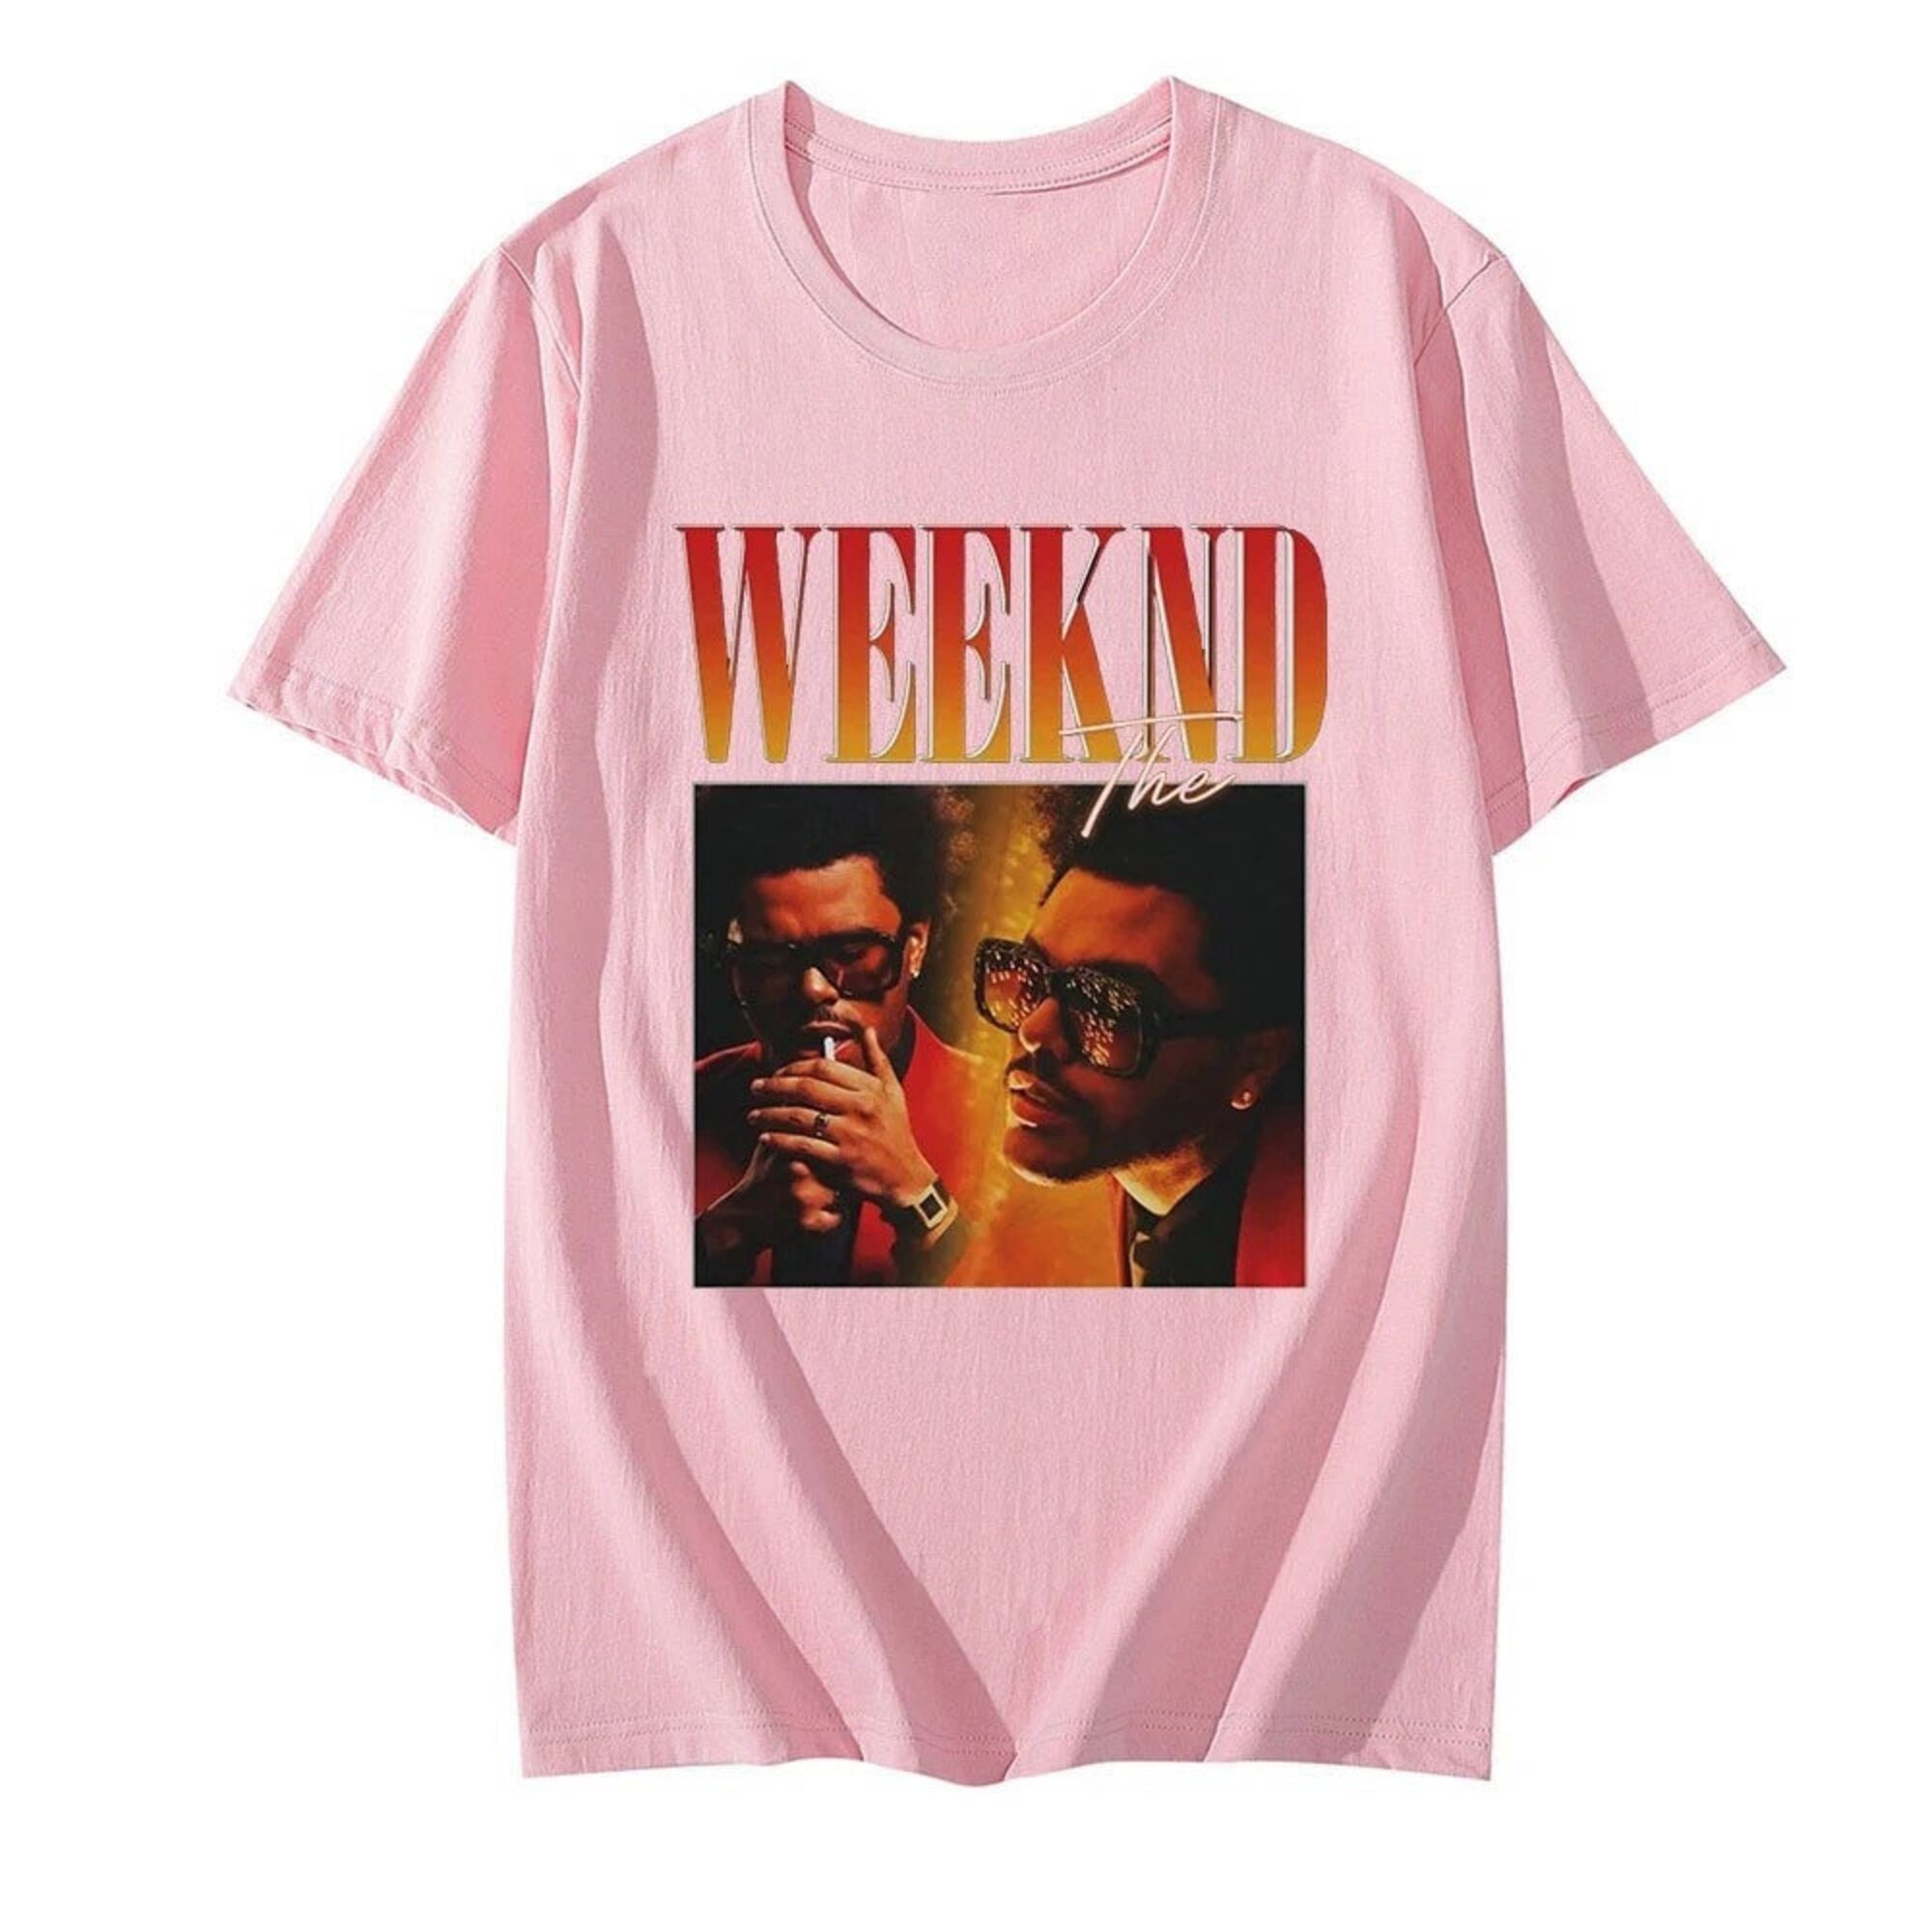 Discover The Weeknd Tshirt | The Weeknd Tee | 90s Vintage Tshirt | After Hours T-shirt | The Weekend Tshirt